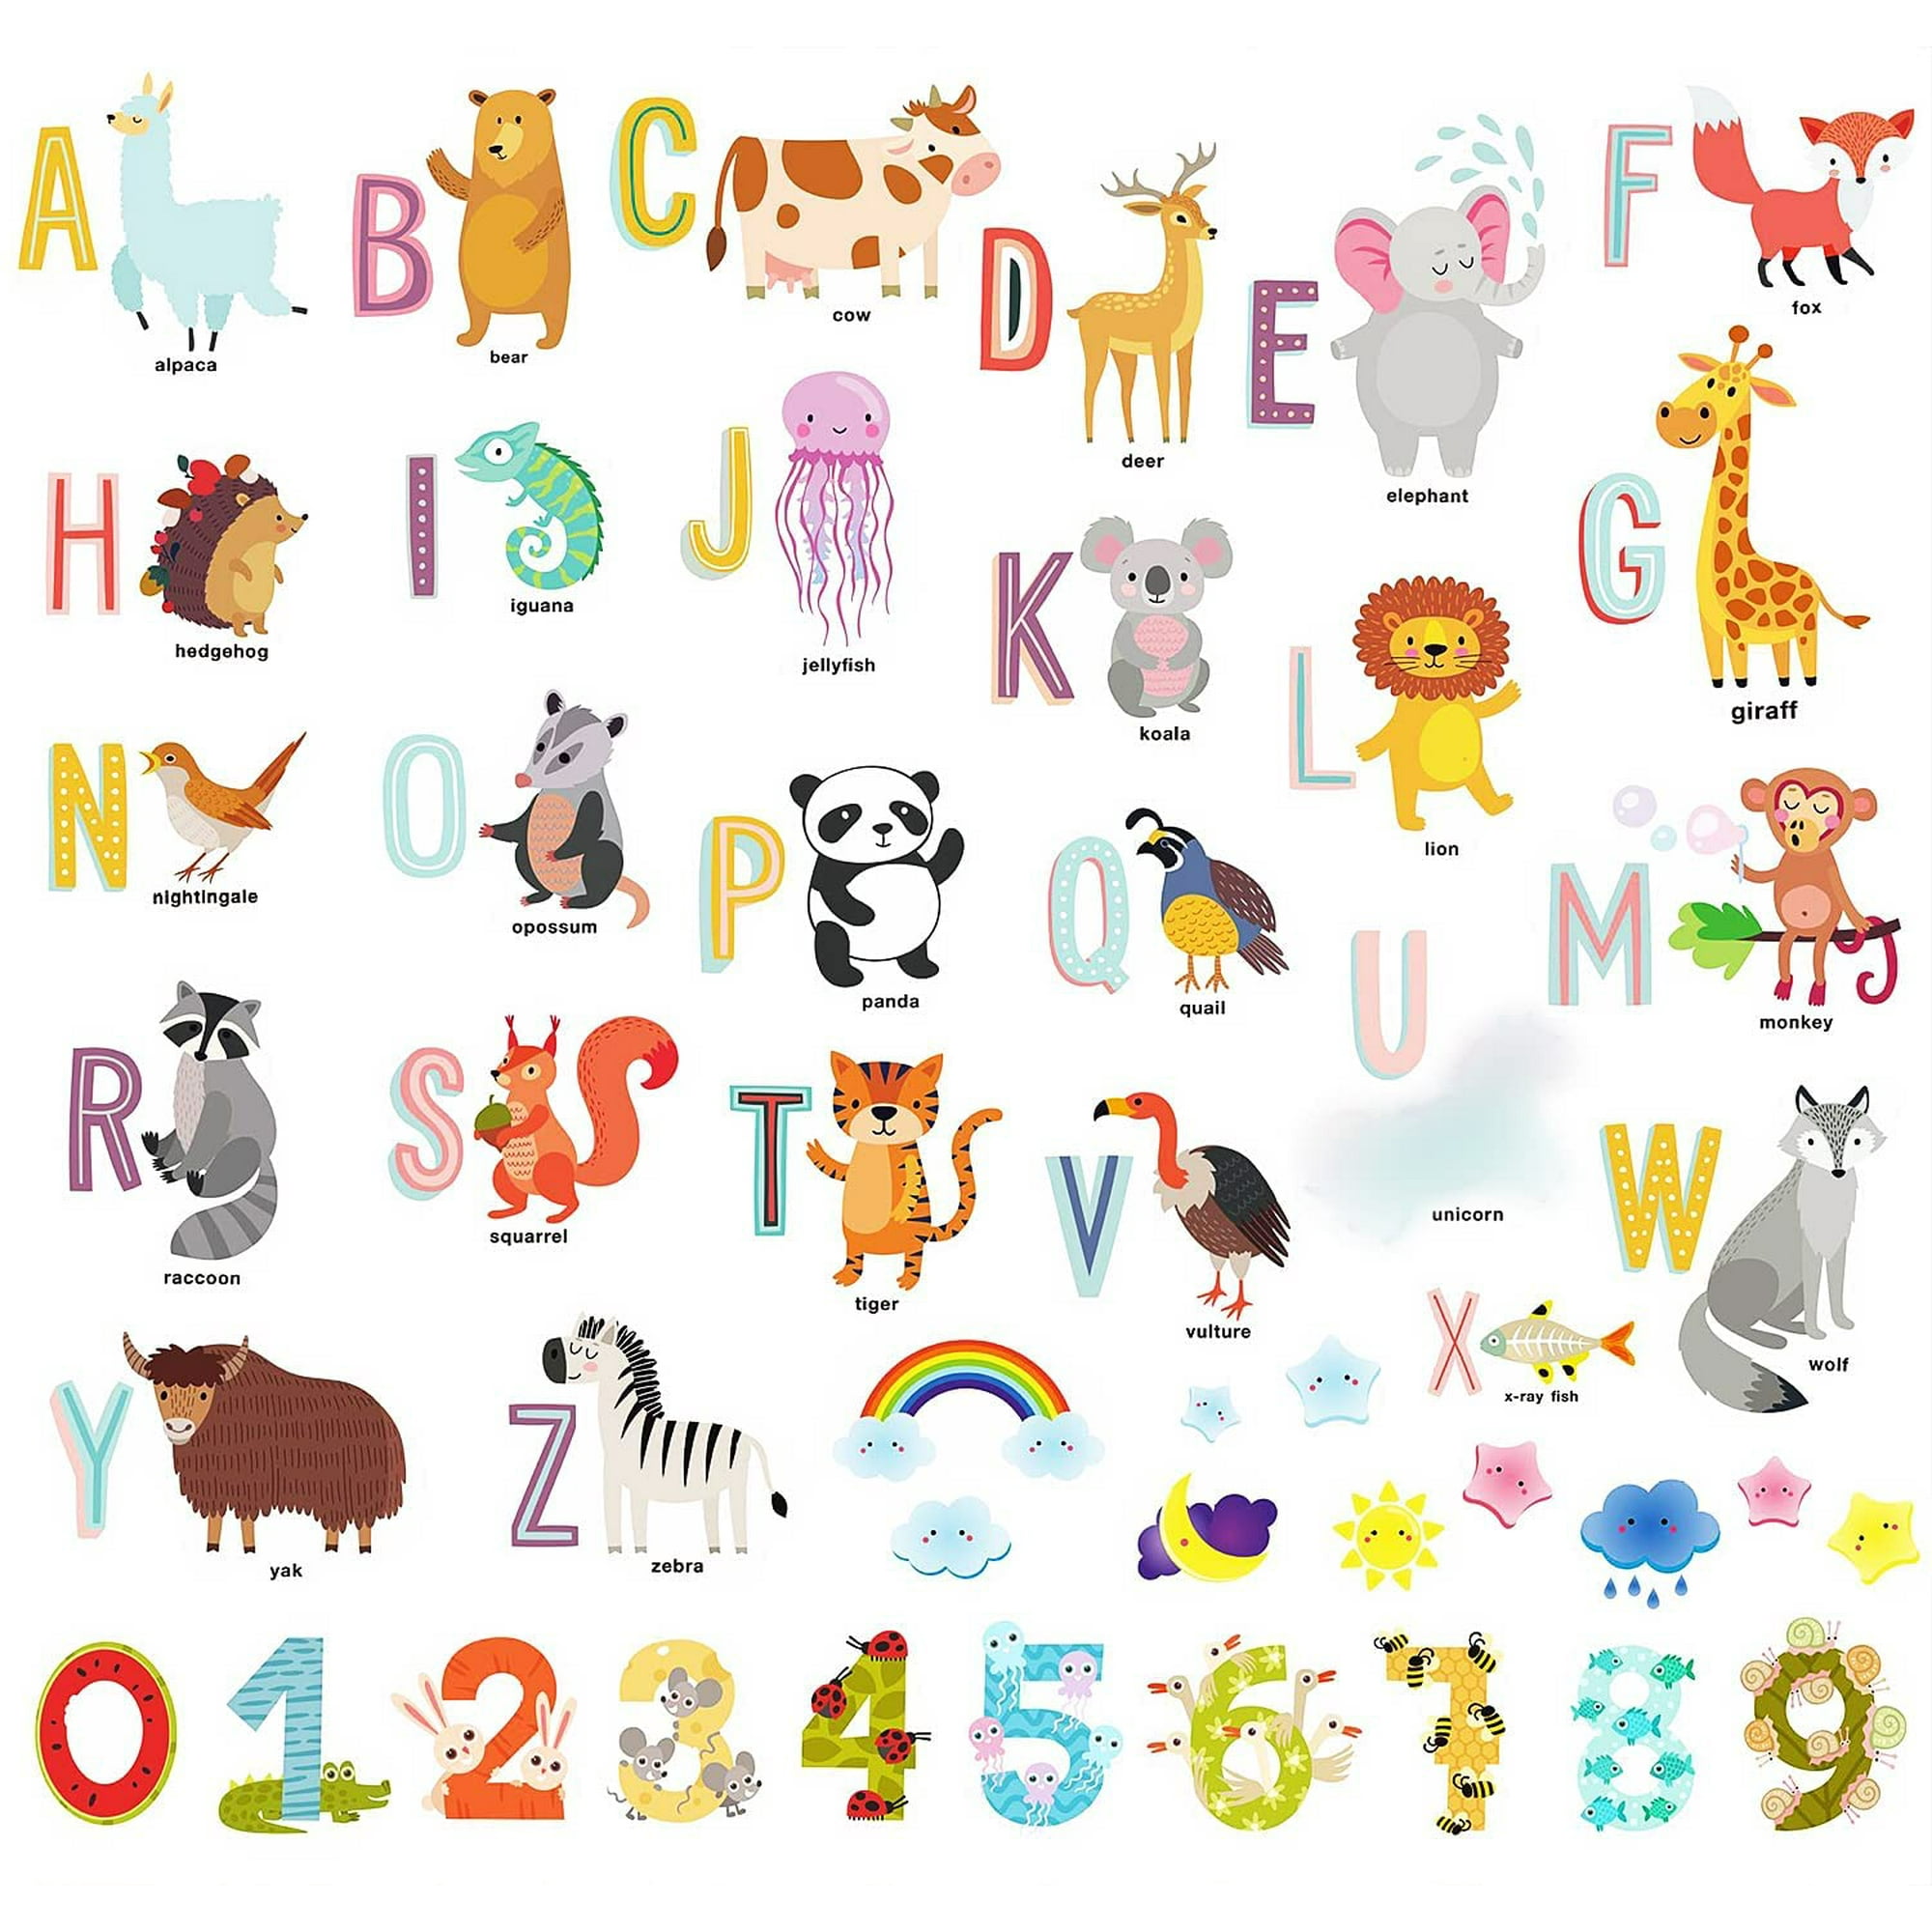 Alphabet Wall Stickers Removable Animal ABC Letters Numbers Educational  Learning Wall Decals for Boys Girls Classroom Nursery Playing Room |  Walmart Canada